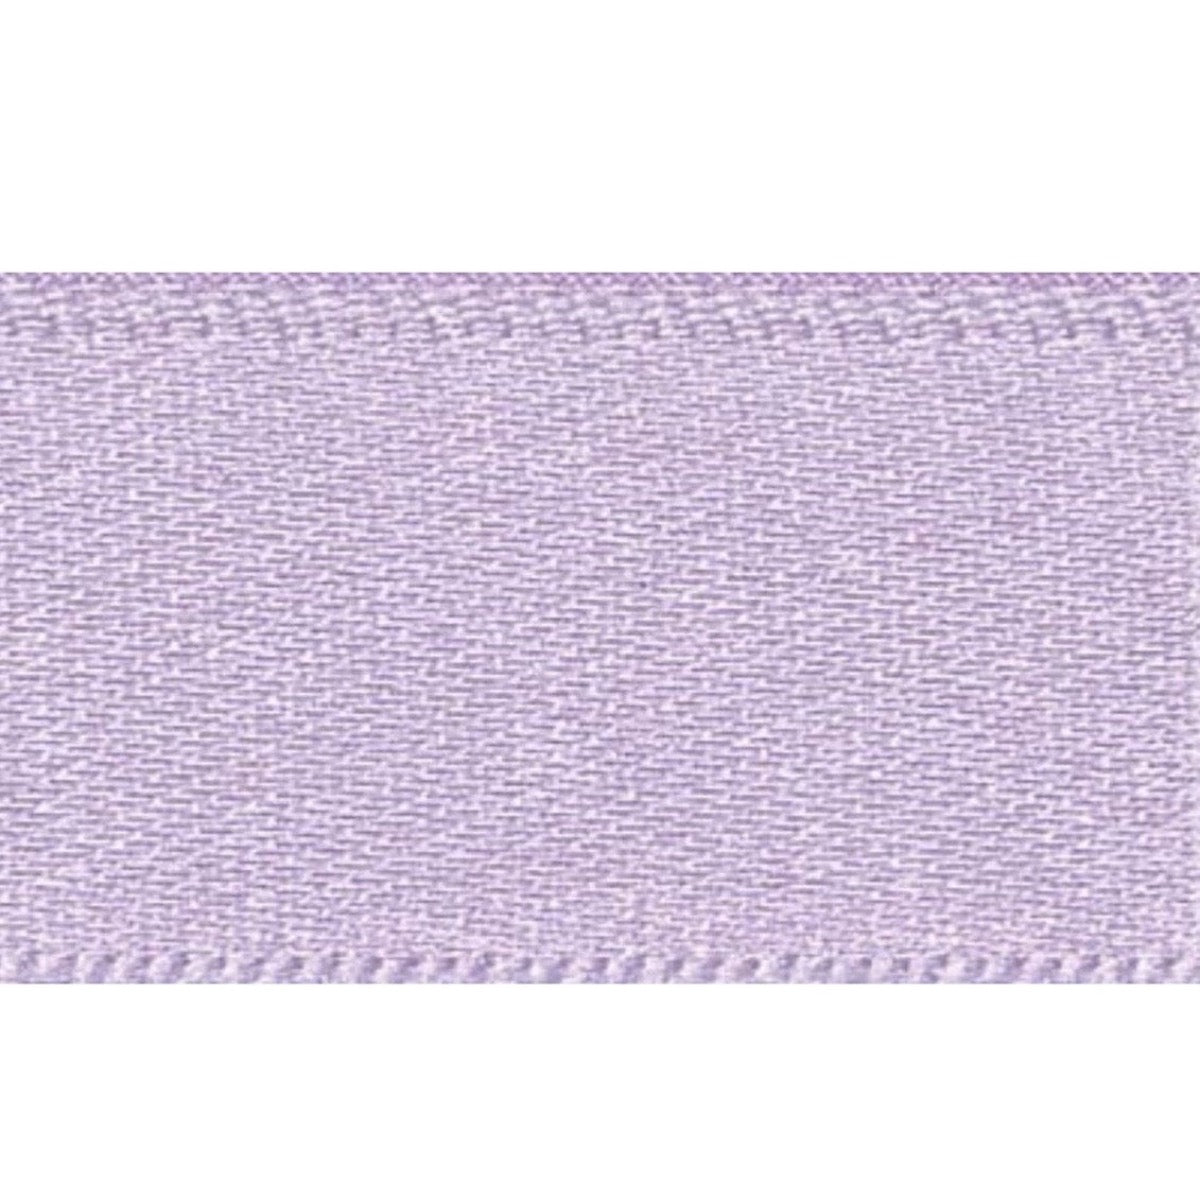 Double Faced Satin Ribbon Orchid Purple: 7mm wide. Price per metre.